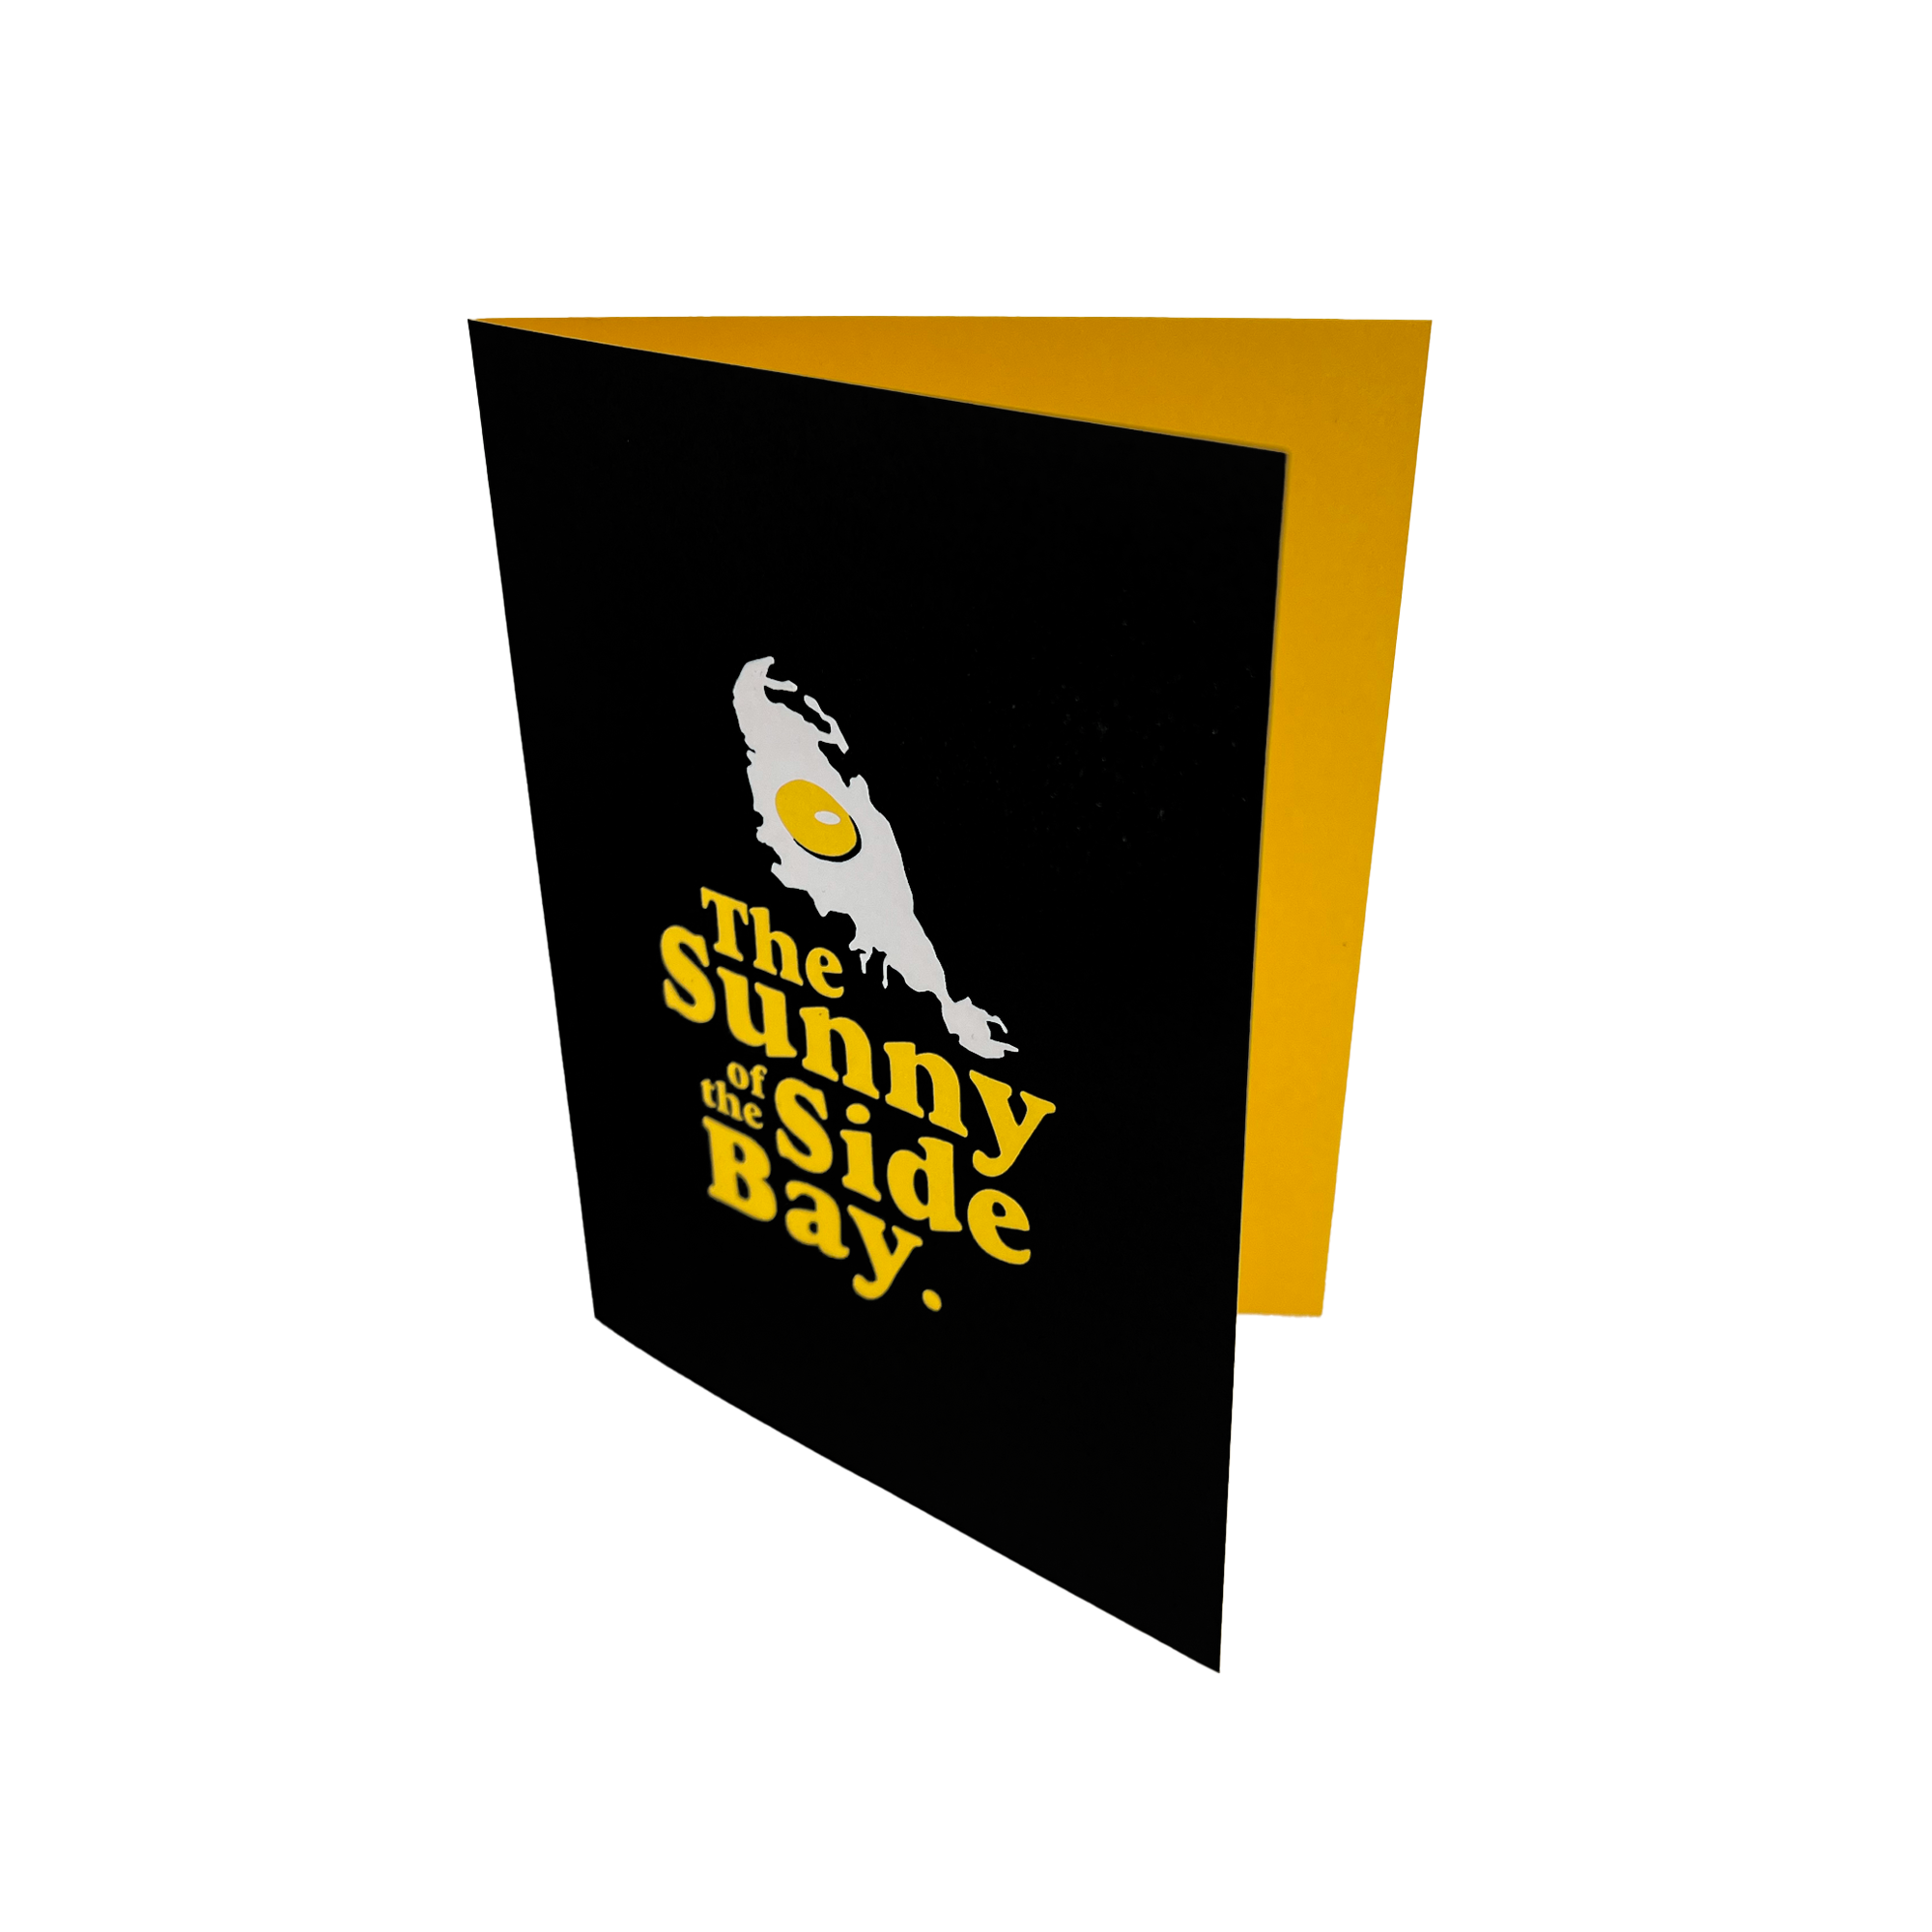 Black greeting card with The Sunnyside of the Bay wordmark and logo - open to expose yellow interior.